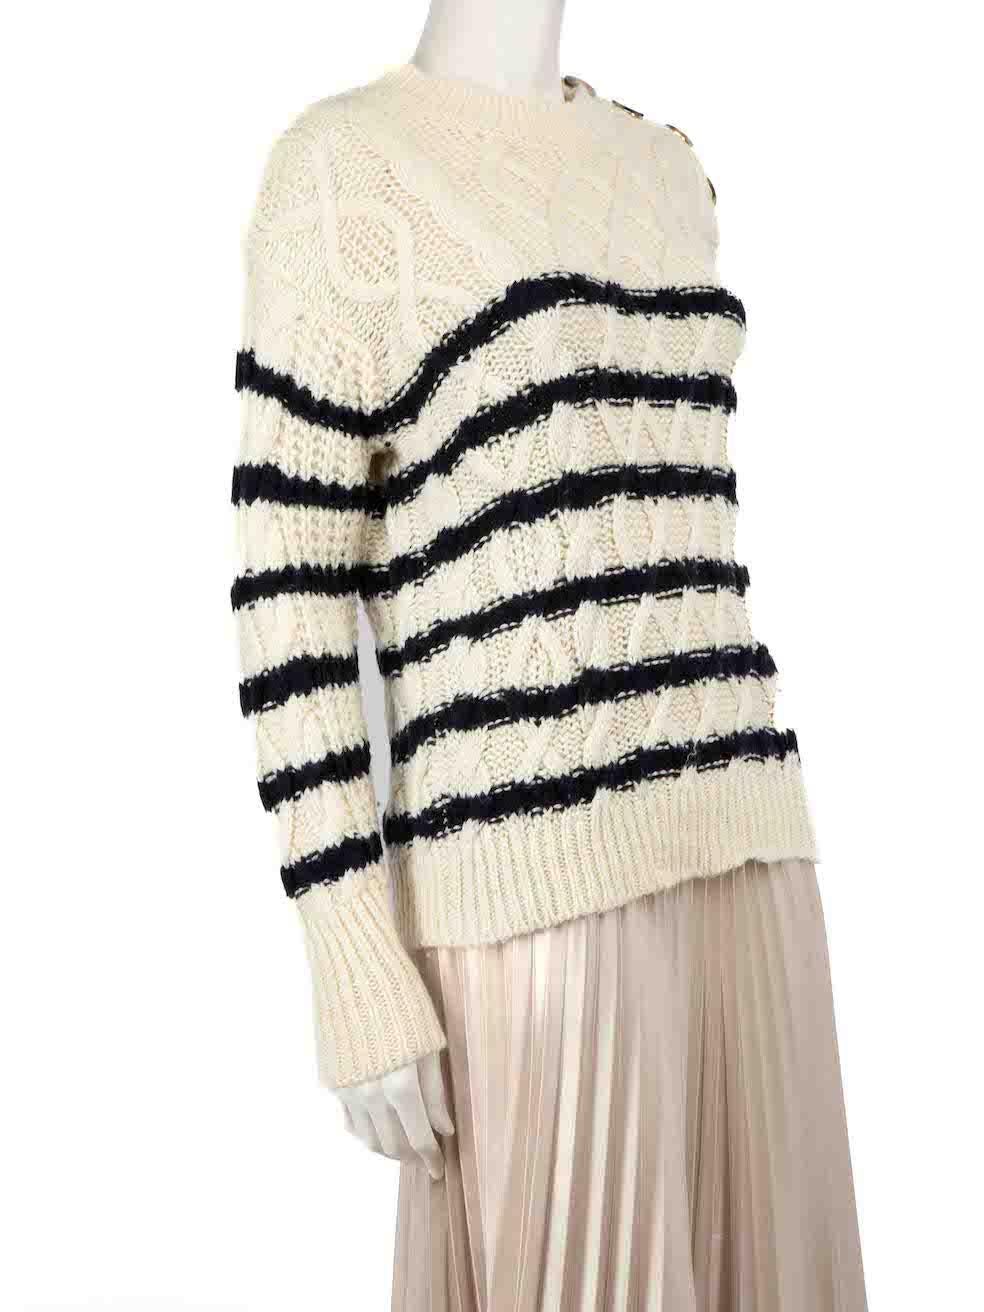 CONDITION is Very good. Minimal wear to jumper is evident. Minimal wear with light pilling to the knit on this used Sèzane designer resale item.
 
 
 
 Details
 
 
 Ecru
 
 Merino wool
 
 Knit jumper
 
 Navy striped pattern
 
 Long sleeves
 
 Round